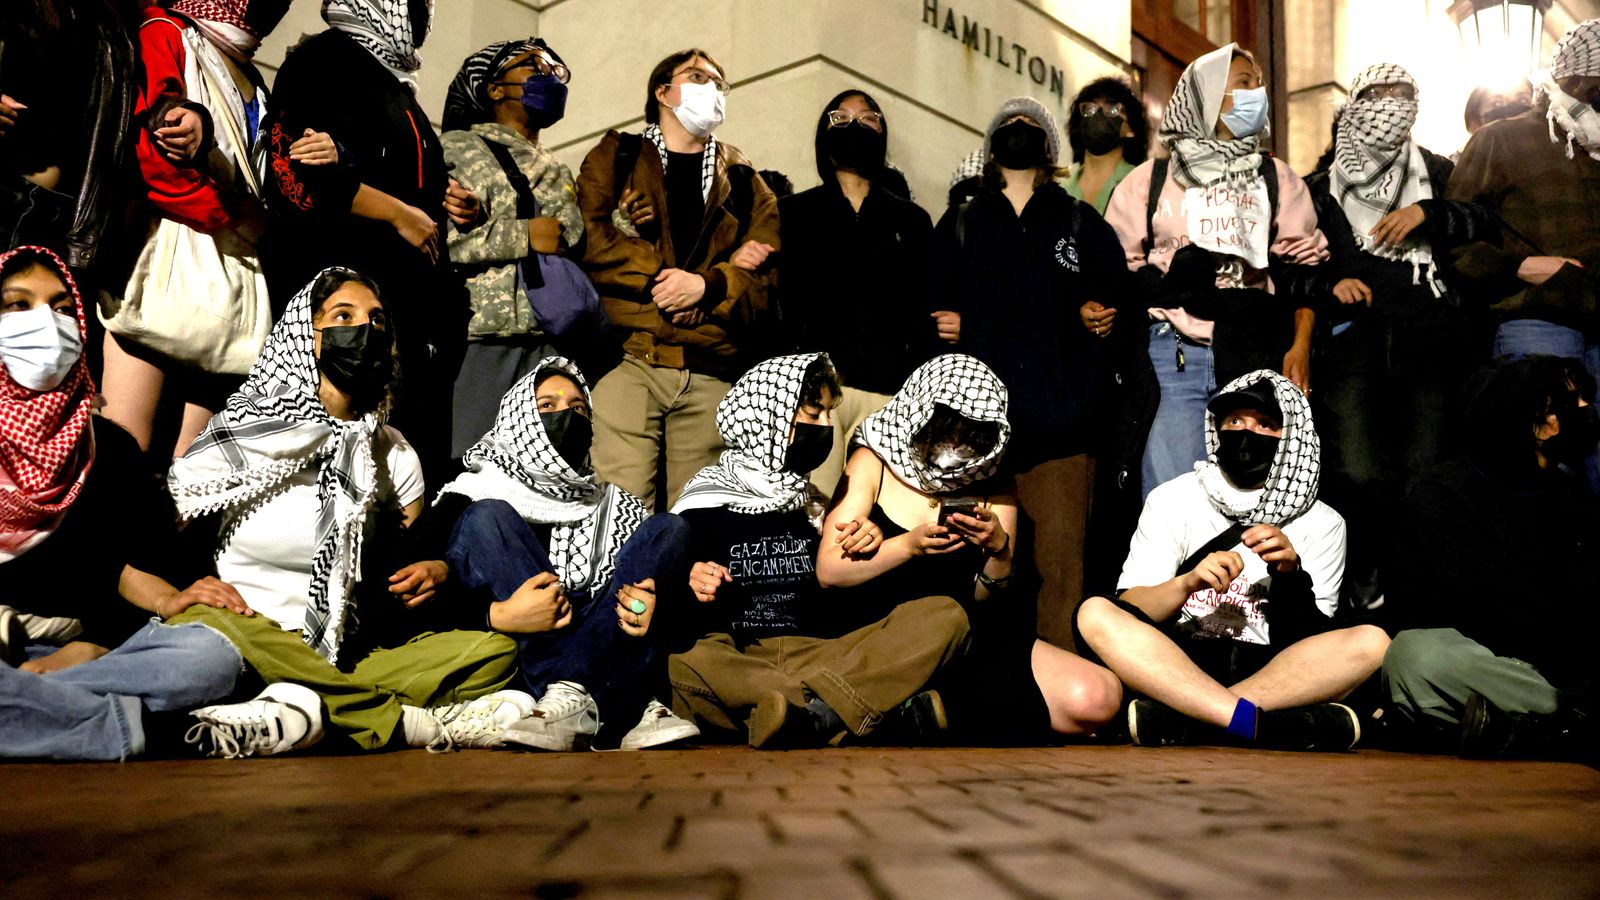 Pro-Palestinian protesters take over building at Columbia University in US